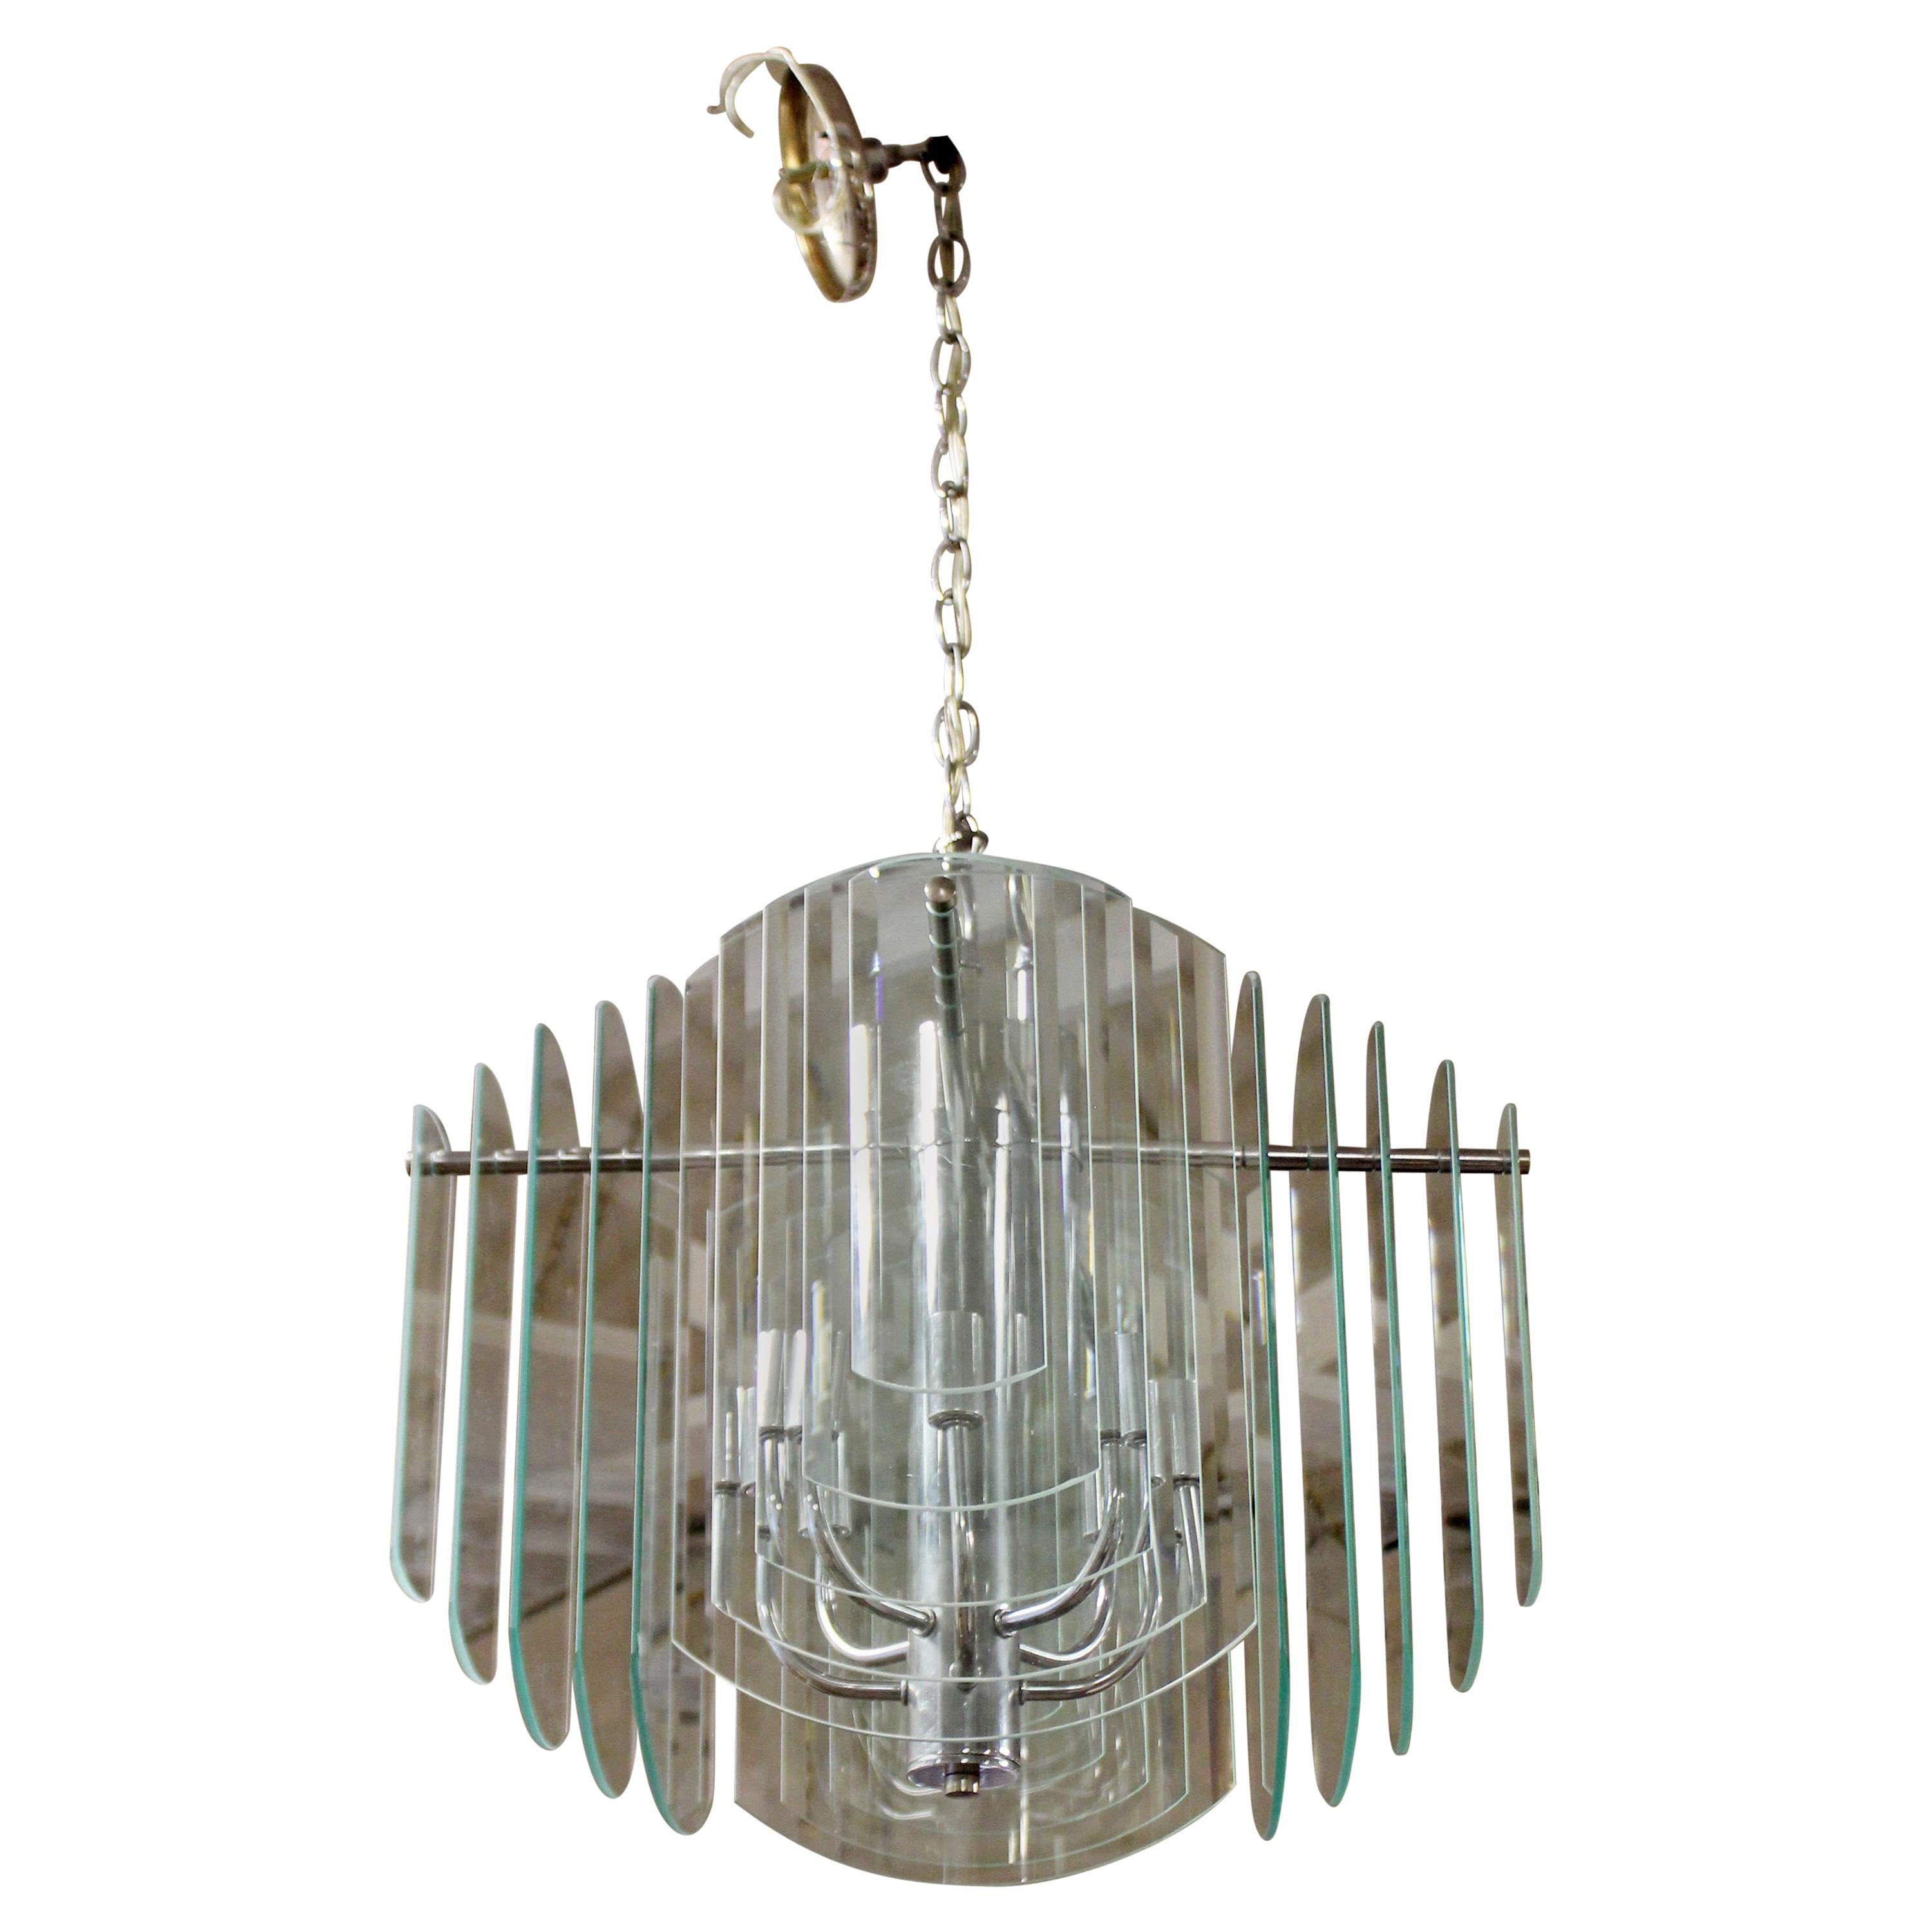 Contemporary Tiered Glass and Chrome Chandelier by Luminaire, 1980s